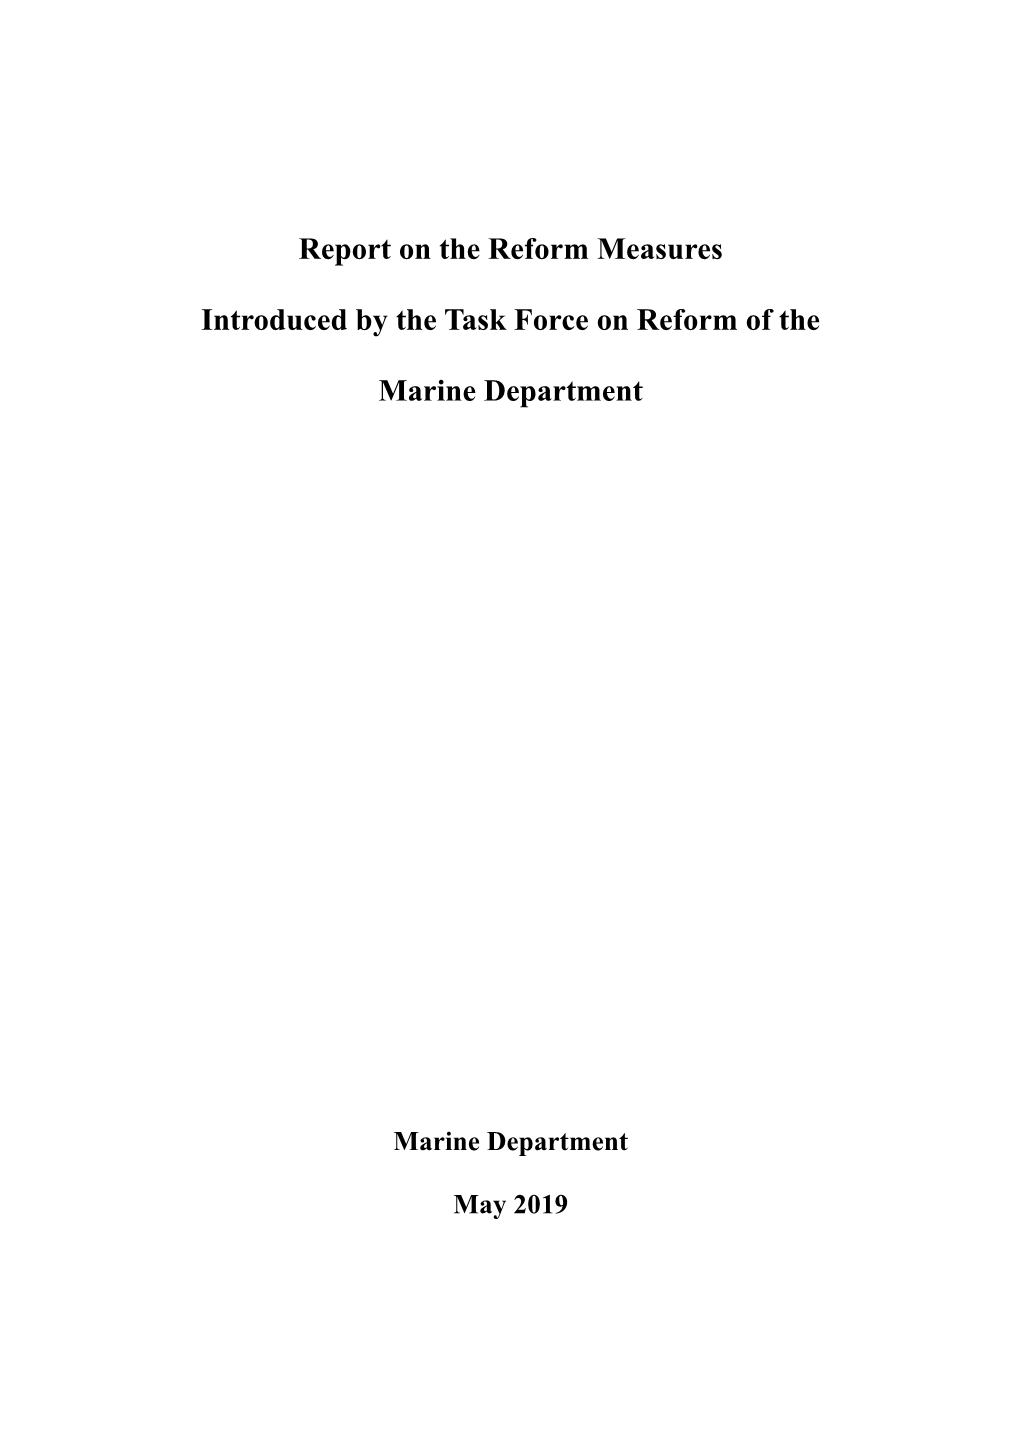 Report on the Reform Measures Introduced by the Task Force On